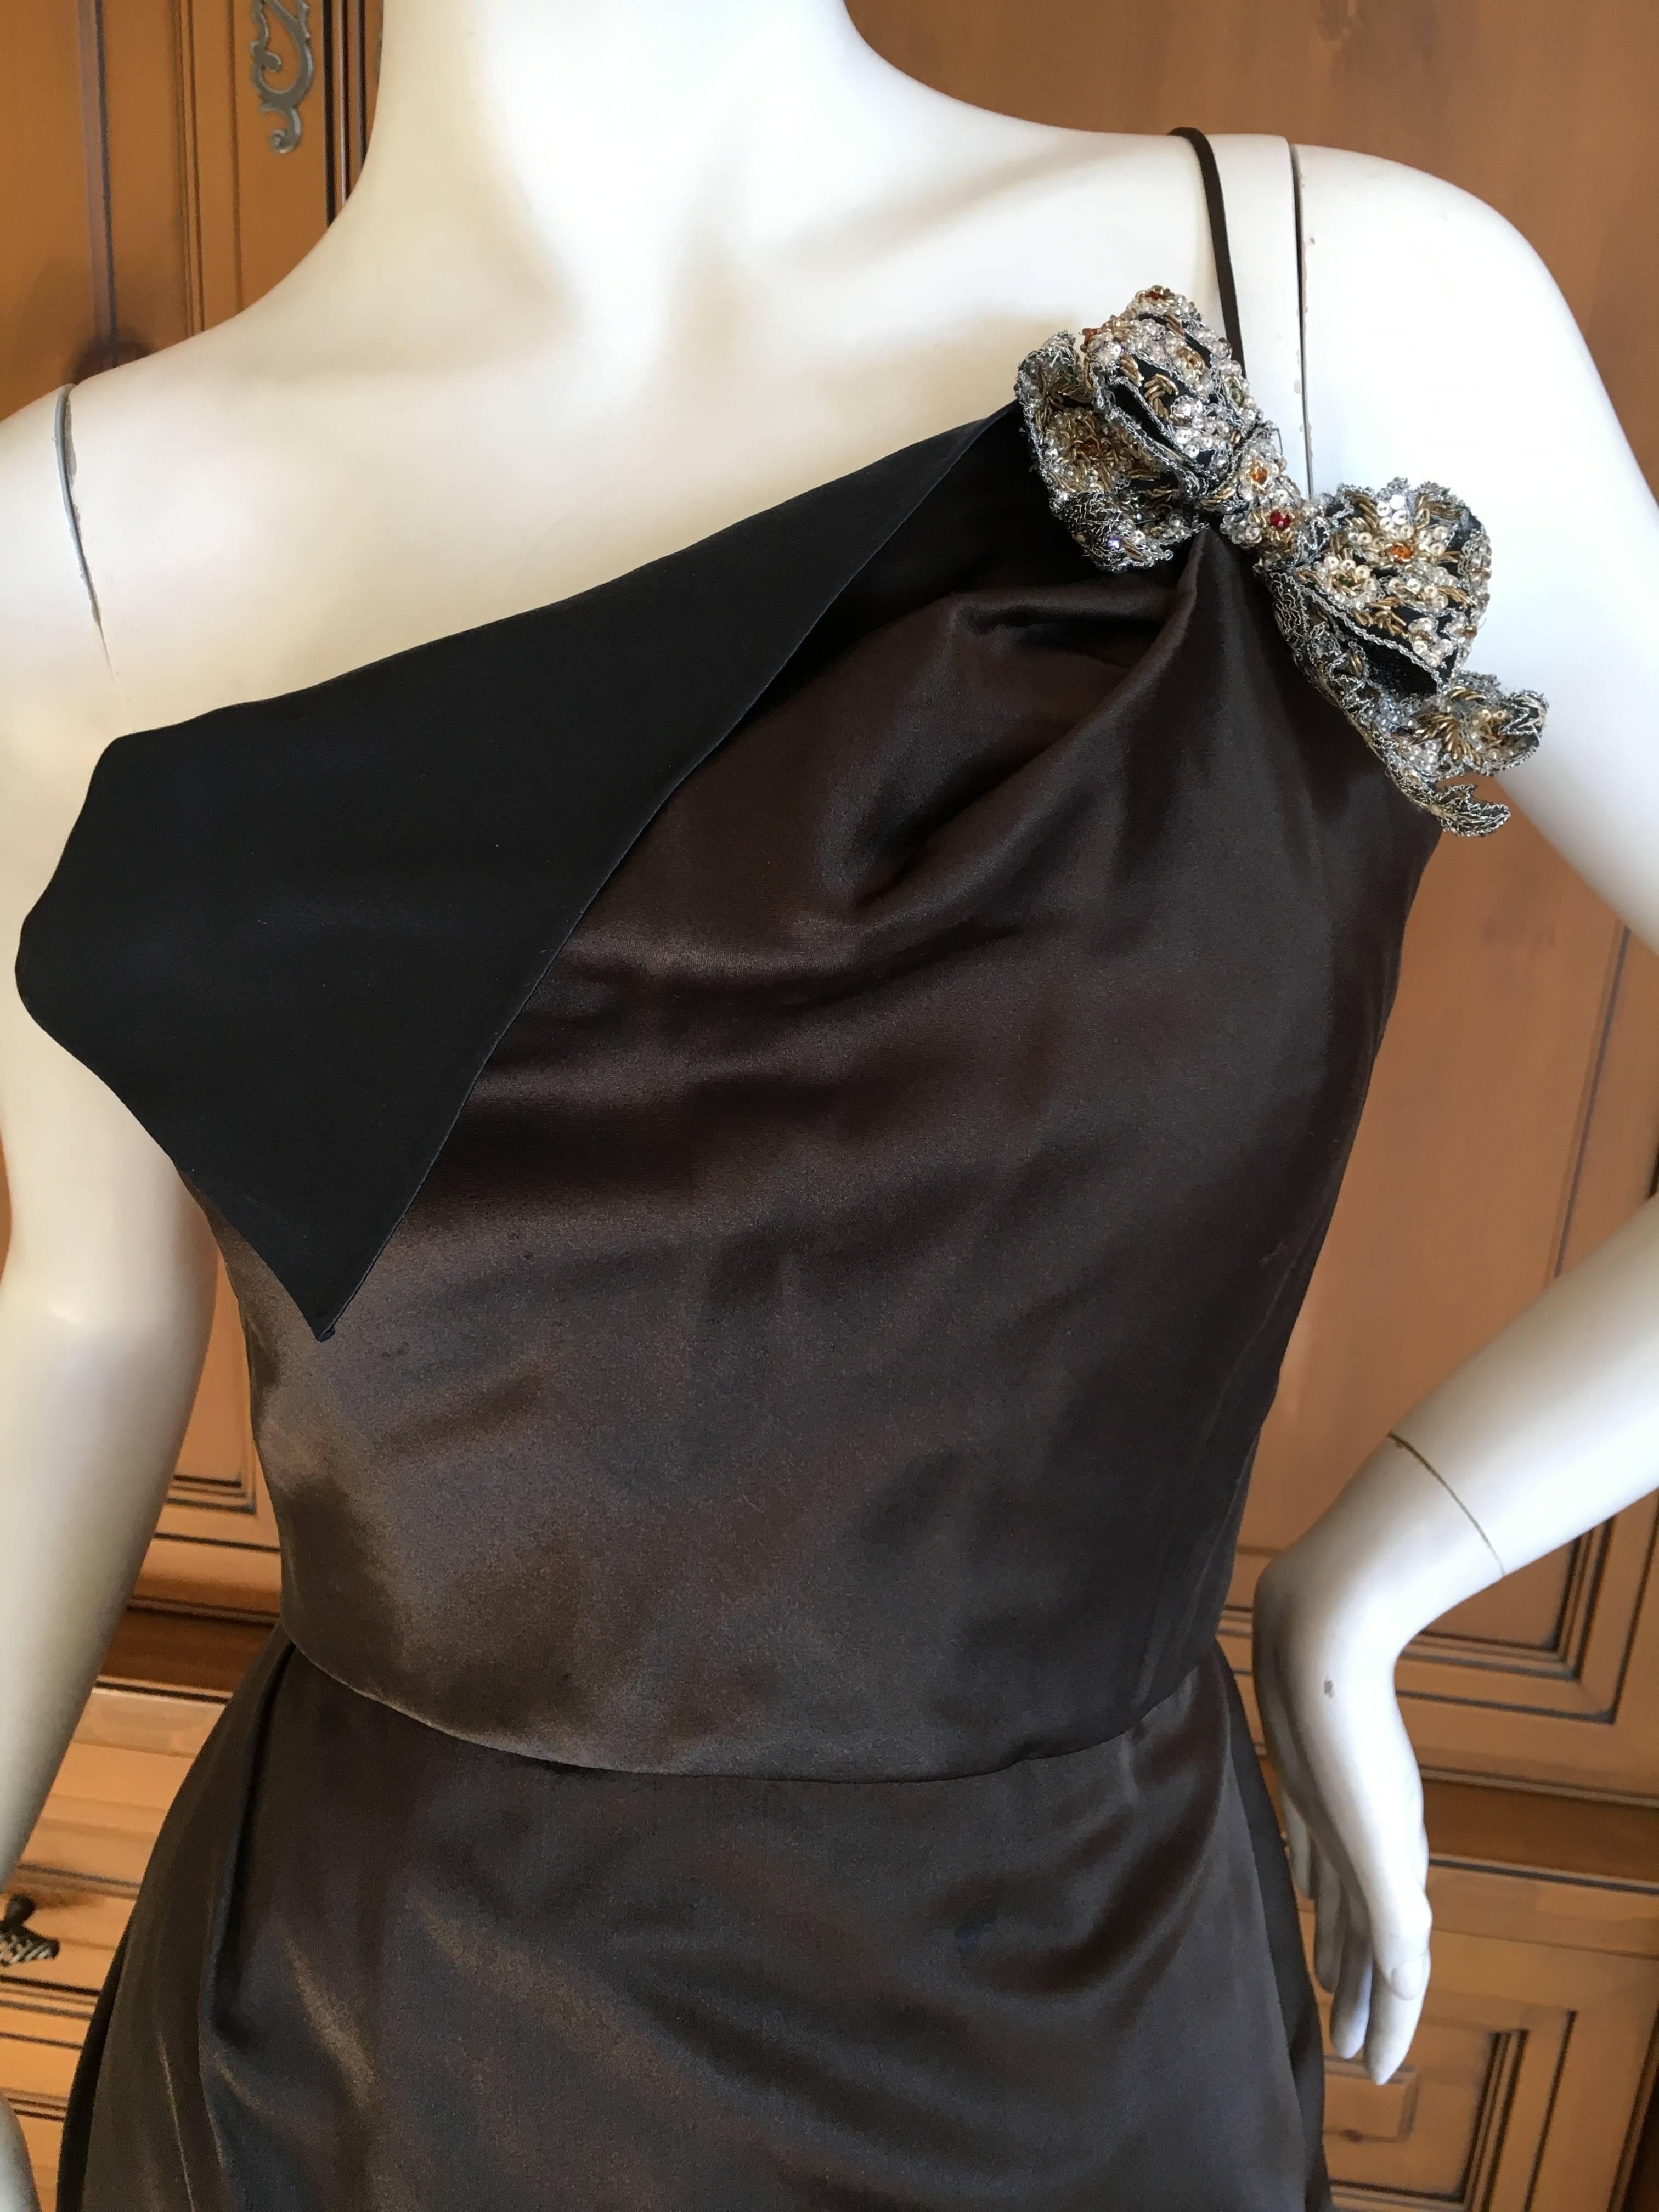 Oscar de la Renta Sweeping Silk Evening Dress in Brown and Navy In Excellent Condition For Sale In Cloverdale, CA